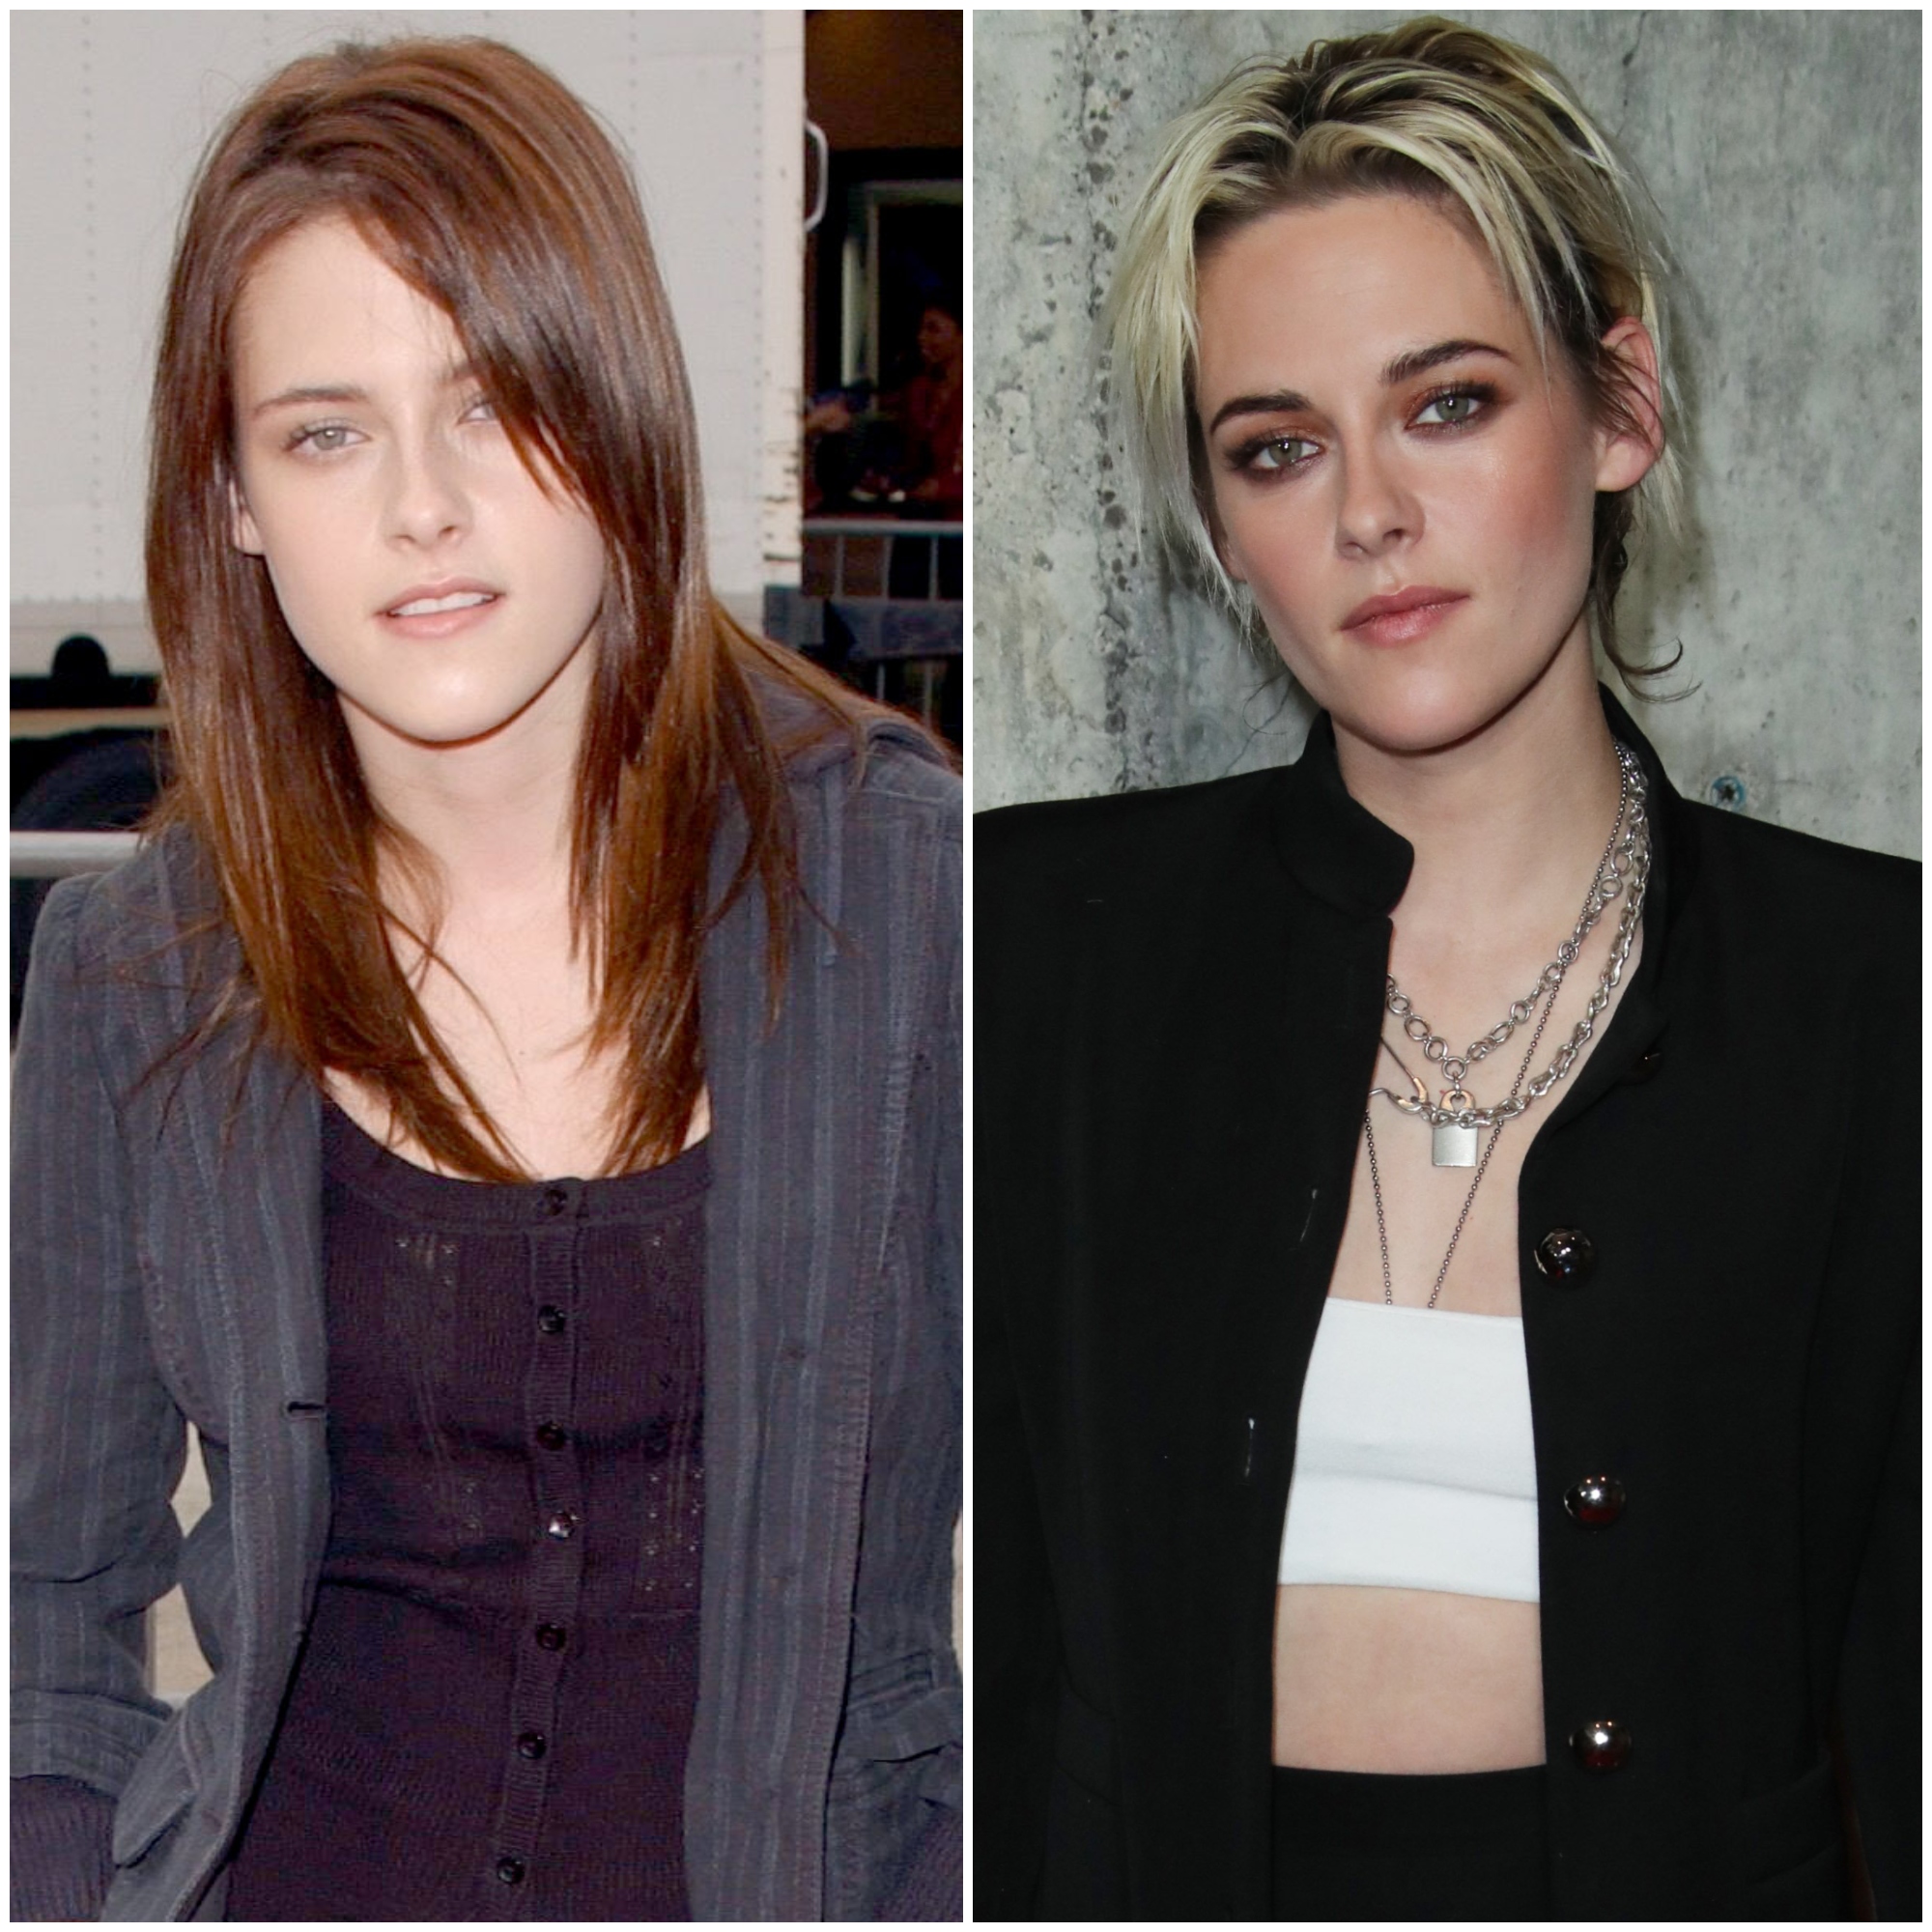 Shemale Sex Change Surgery Before And After - Kristen Stewart's Transformation Over the Years: See Pics!